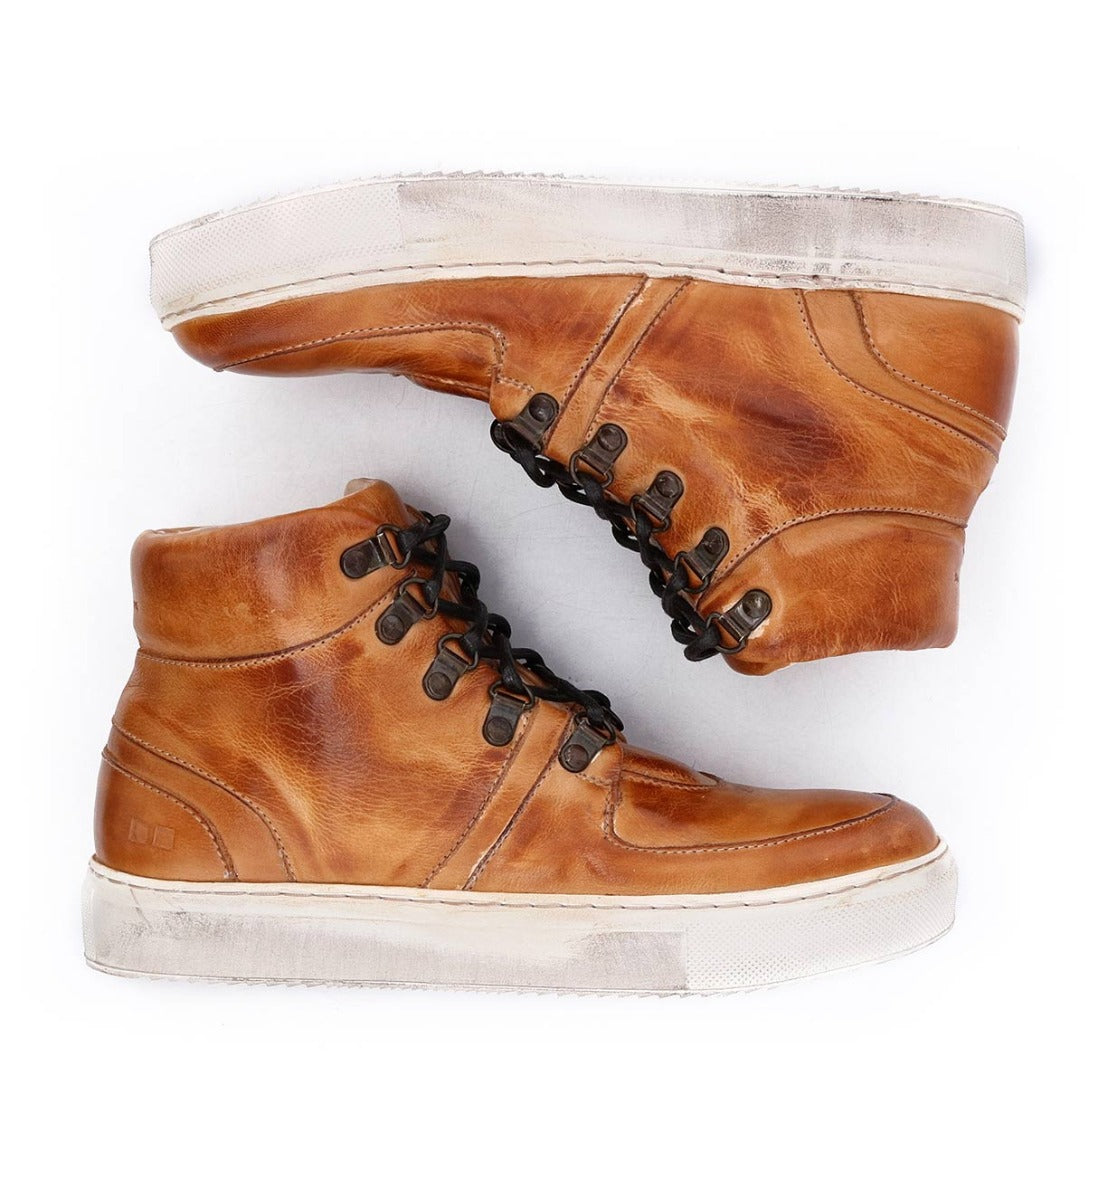 A pair of Bed Stu Honor brown leather sneakers on a white background.